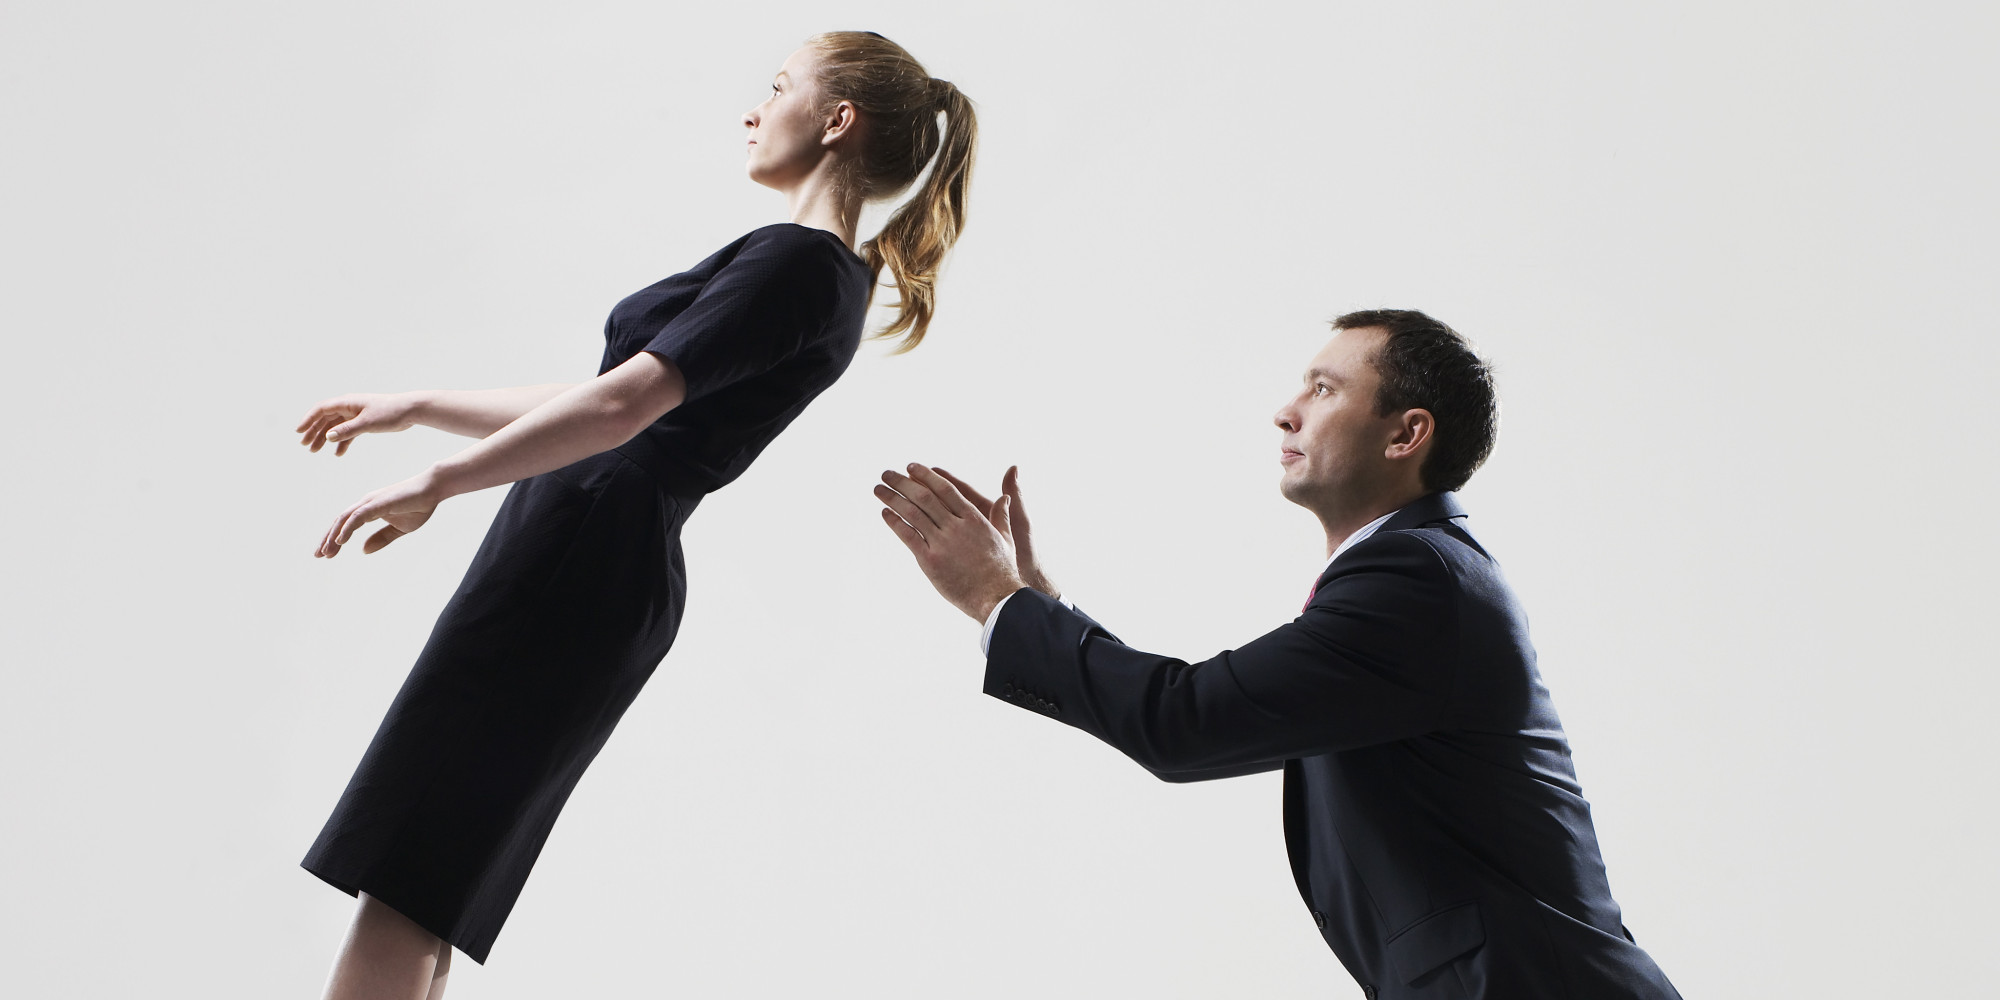 10 Trust Secrets You Need To Practice In Business Huffpost